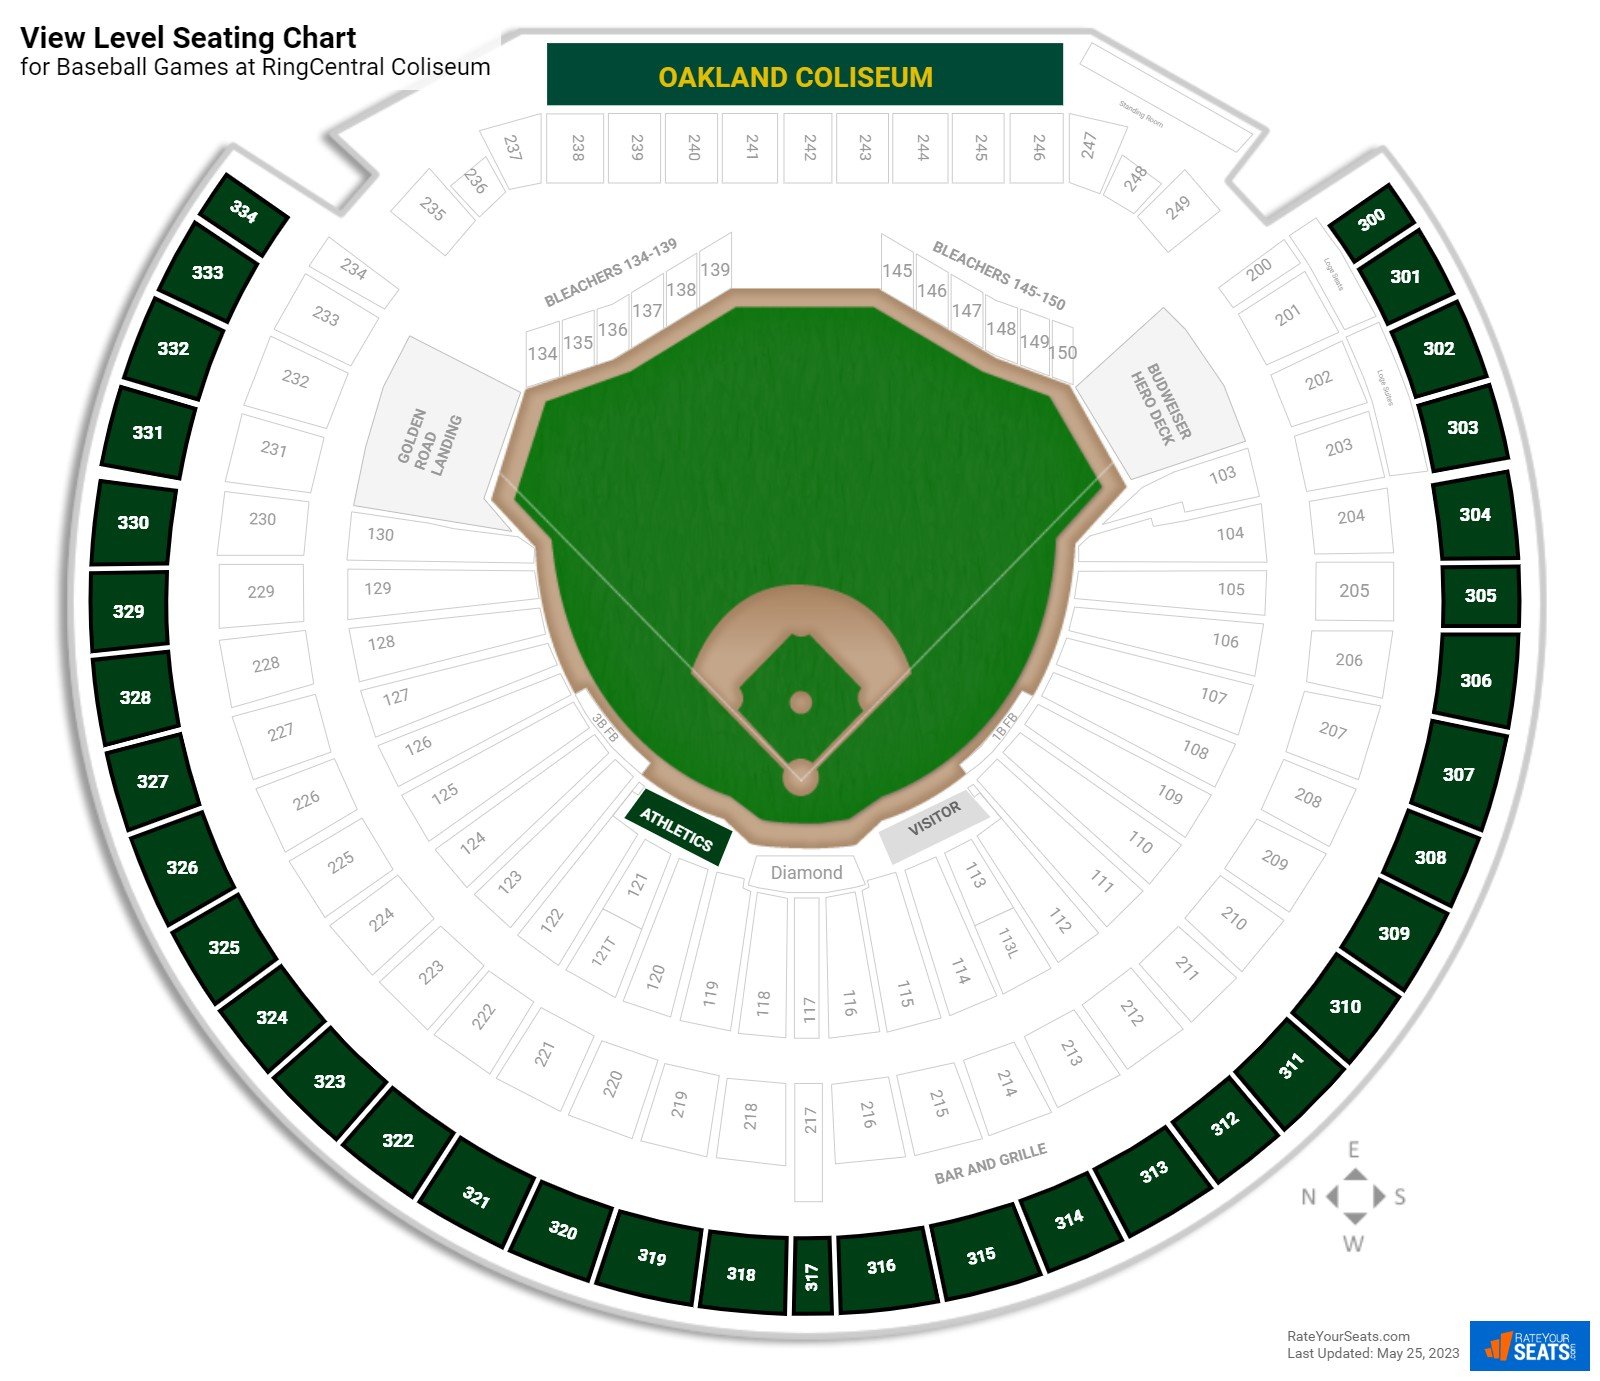 Baseball View Level Seating Chart at RingCentral Coliseum. click to enlarge...